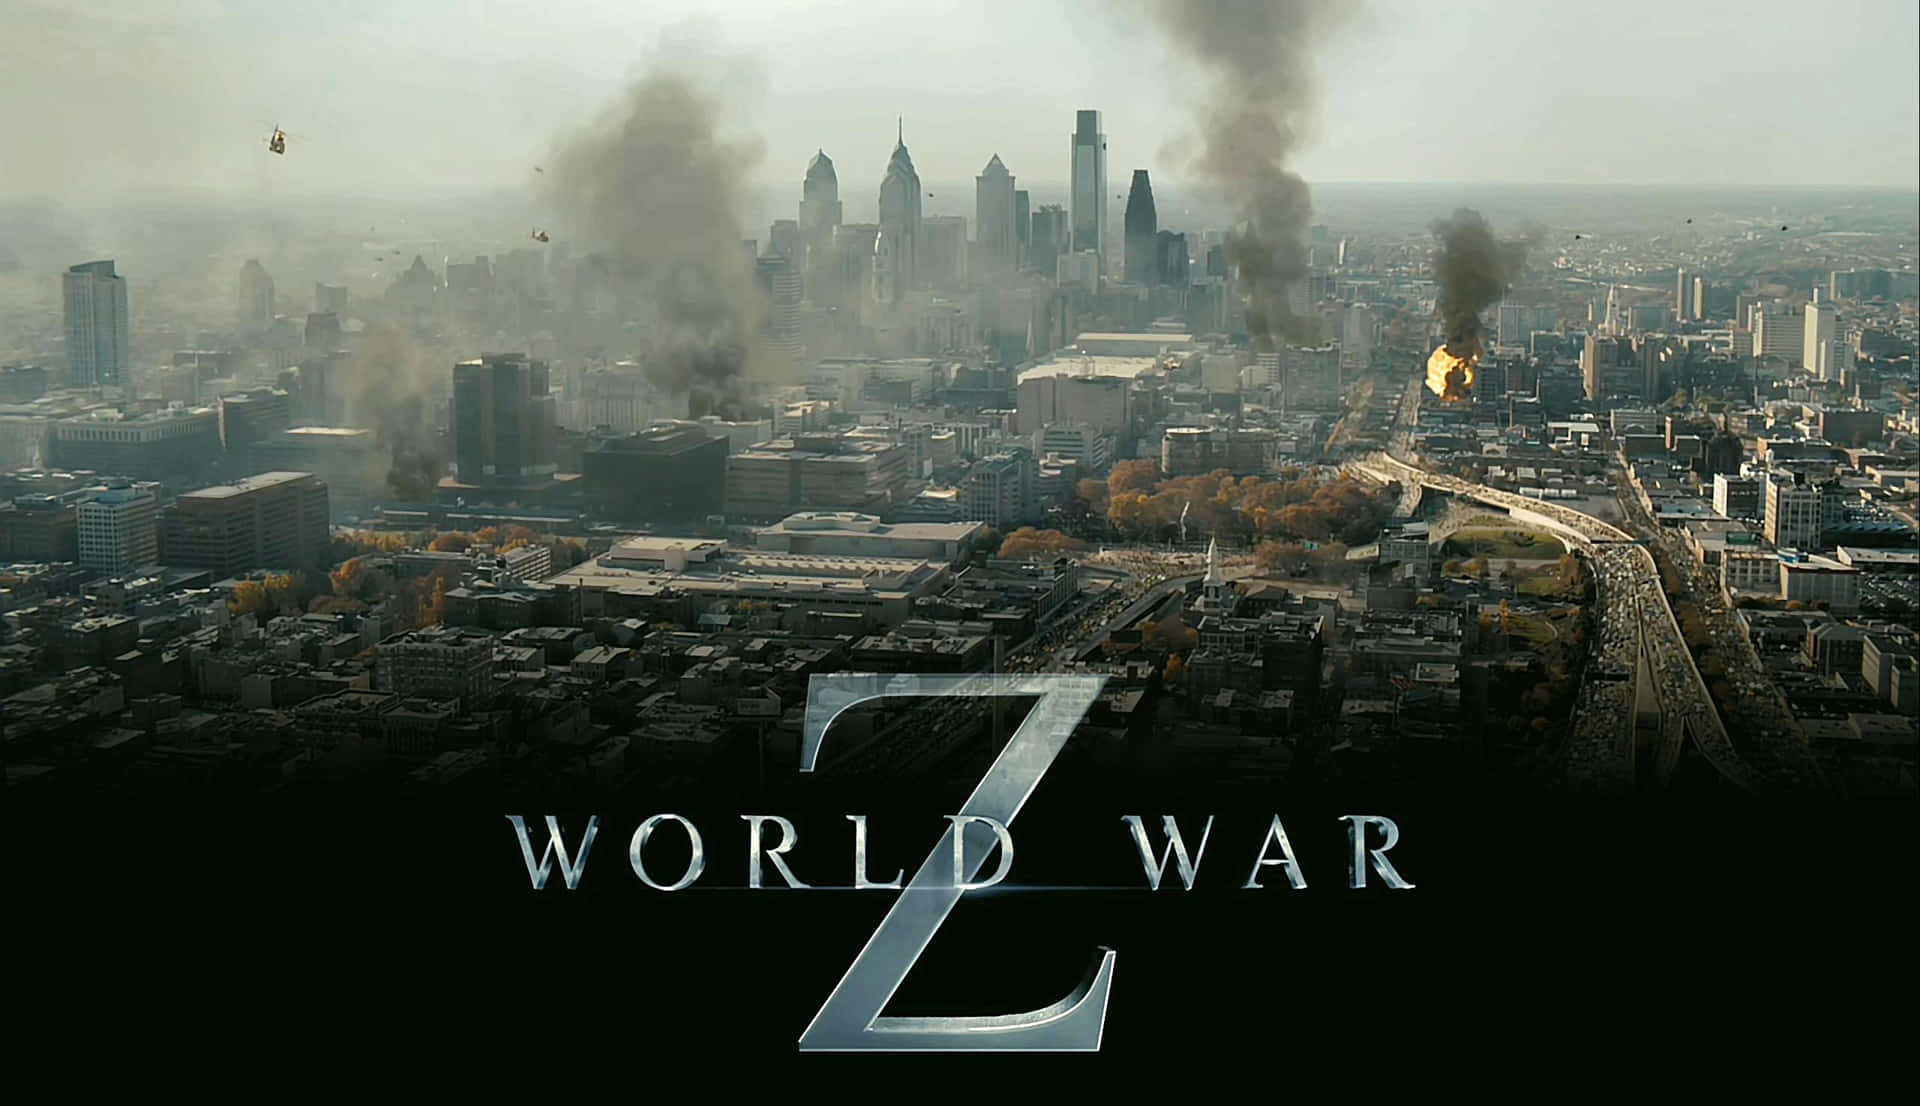 World War Z Poster With Smoke Coming Out Of The City